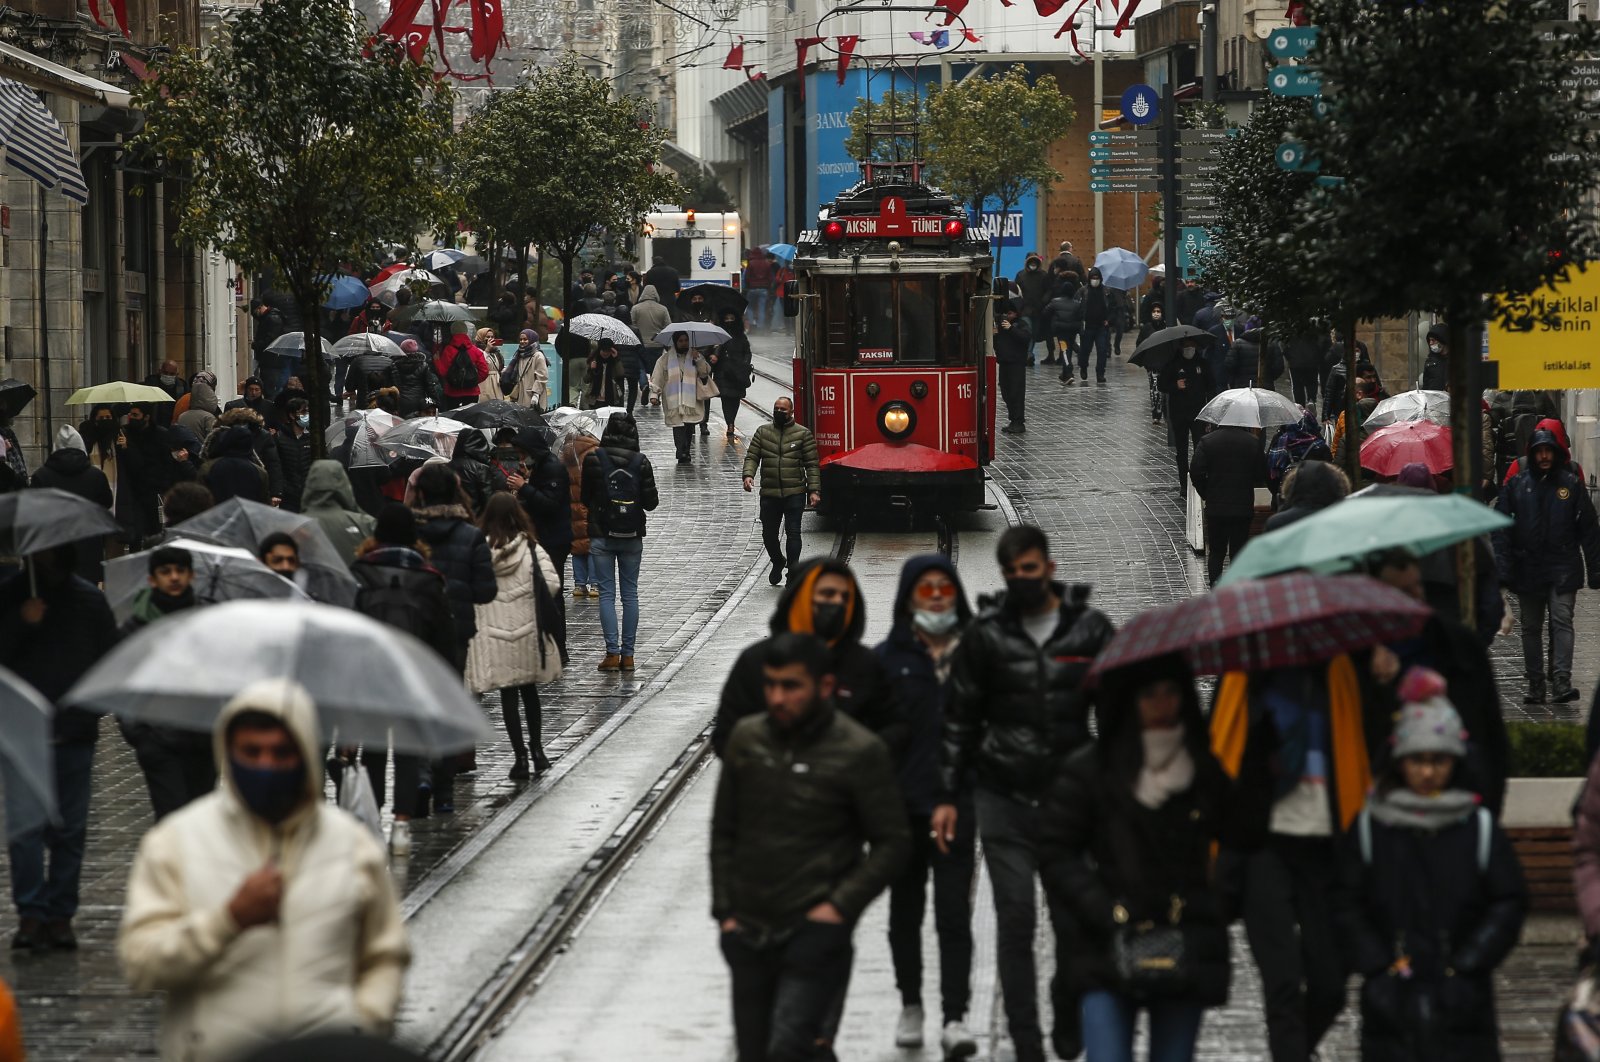 People walk along Istiklal Avenue, one of the main shopping streets in Istanbul, Turkey, Feb. 3, 2022. (AP Photo)